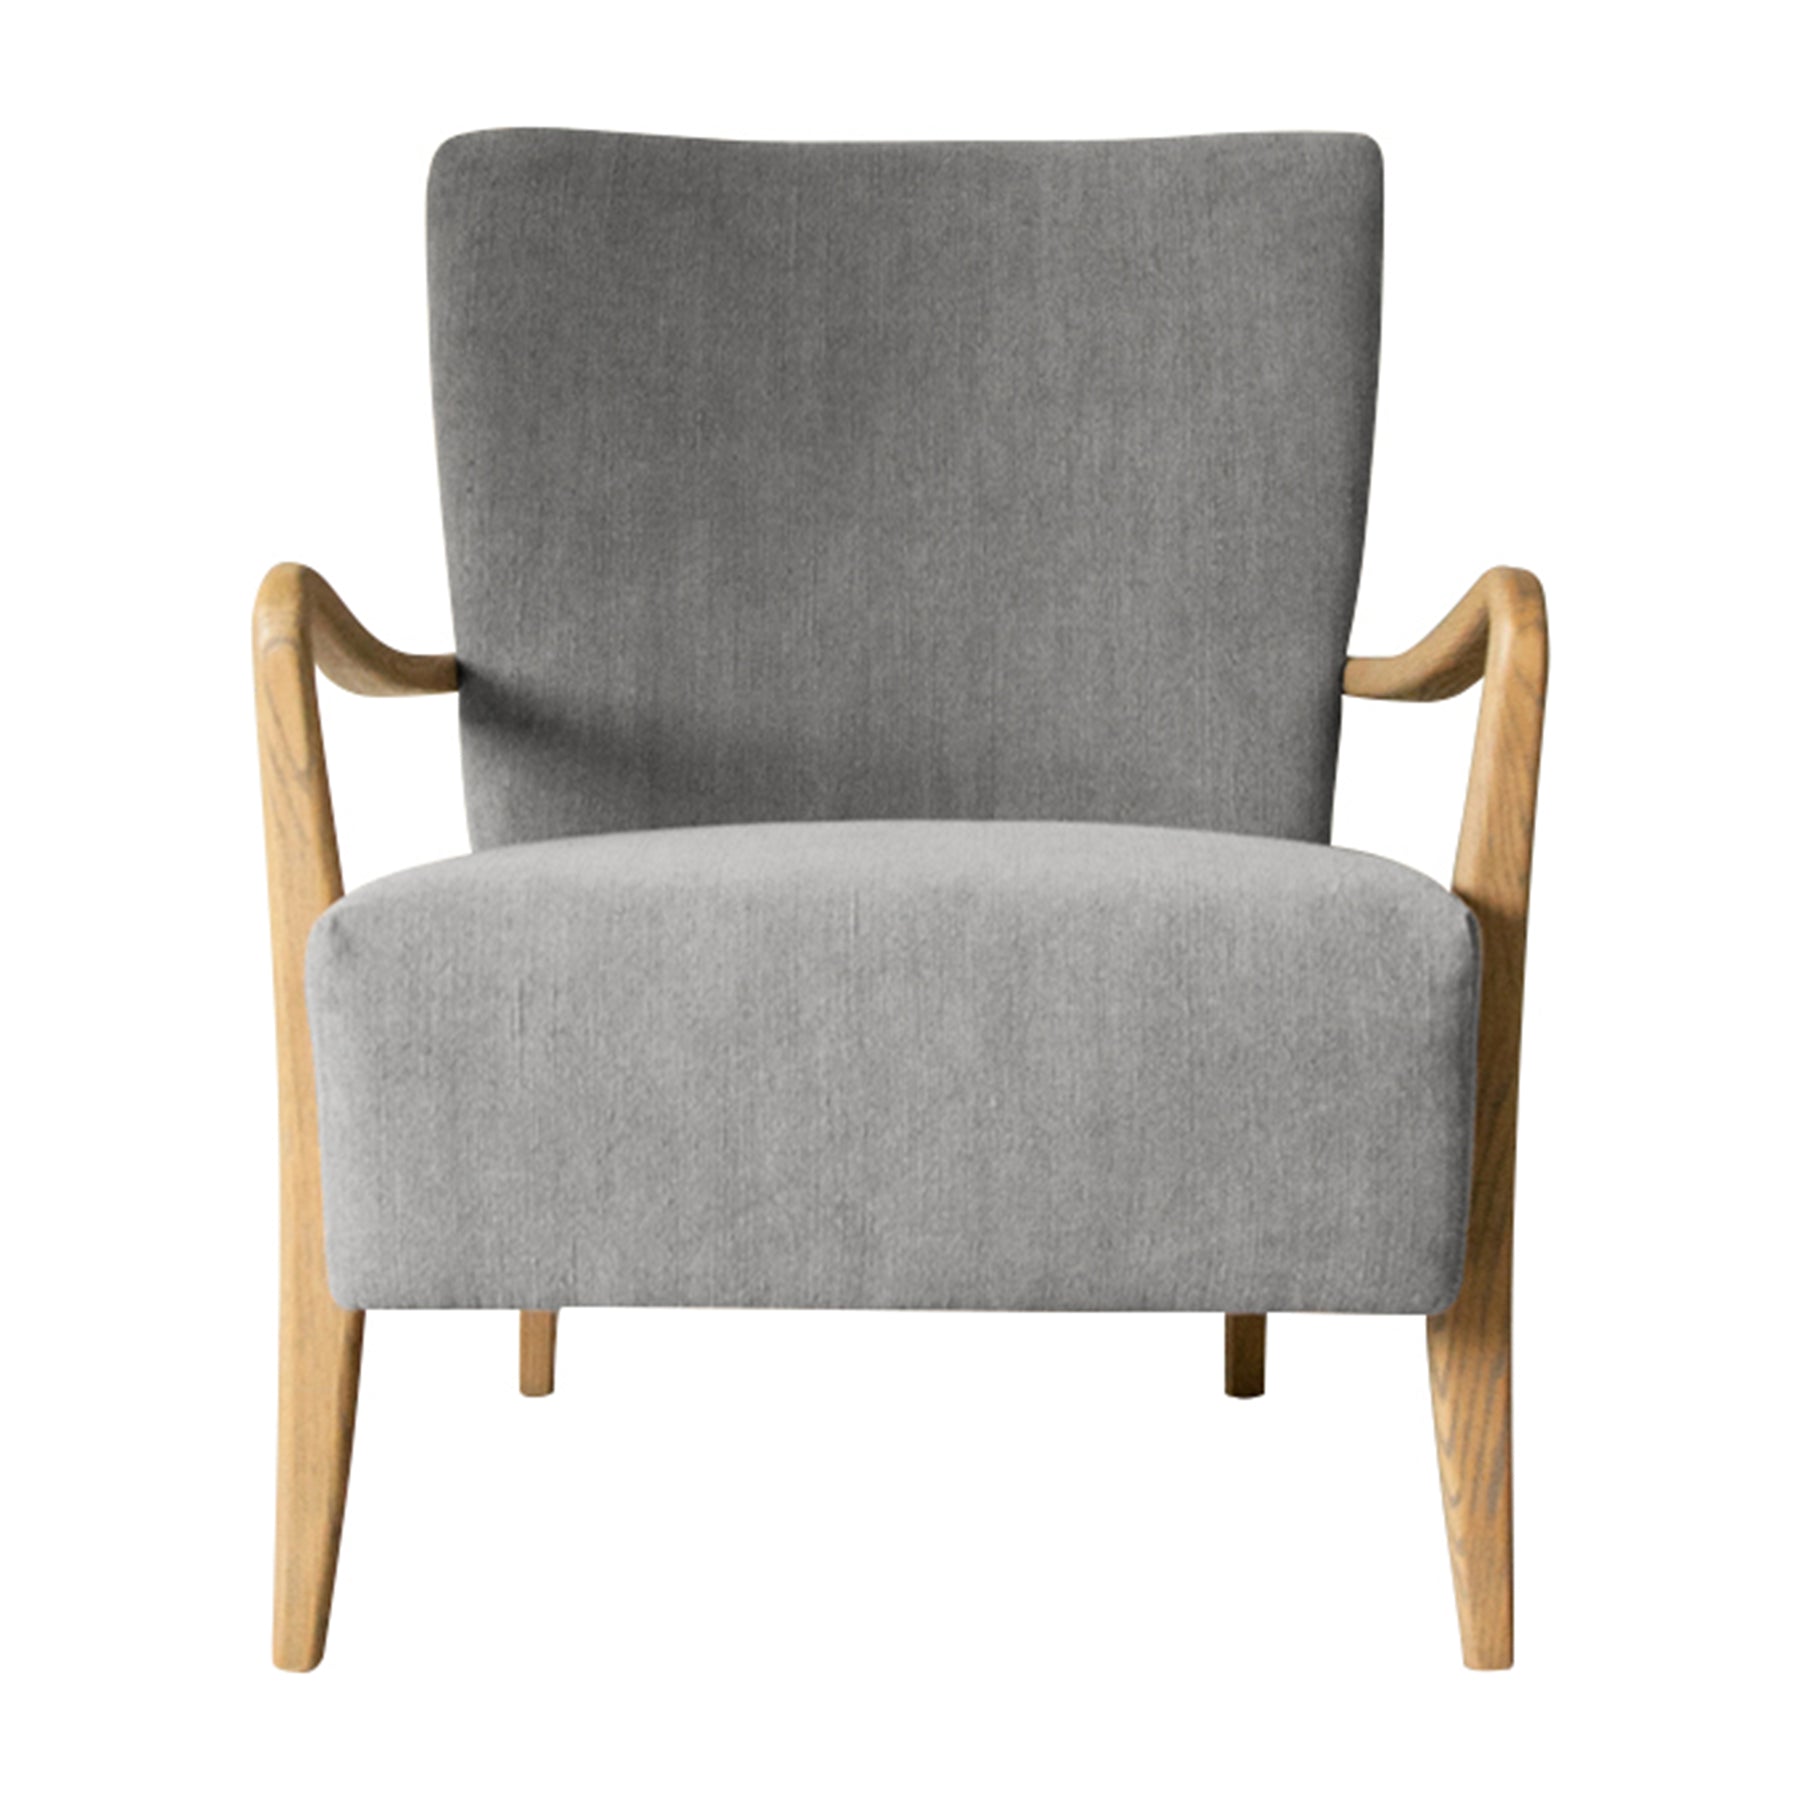 Chedworth Arm Chair Charcoal